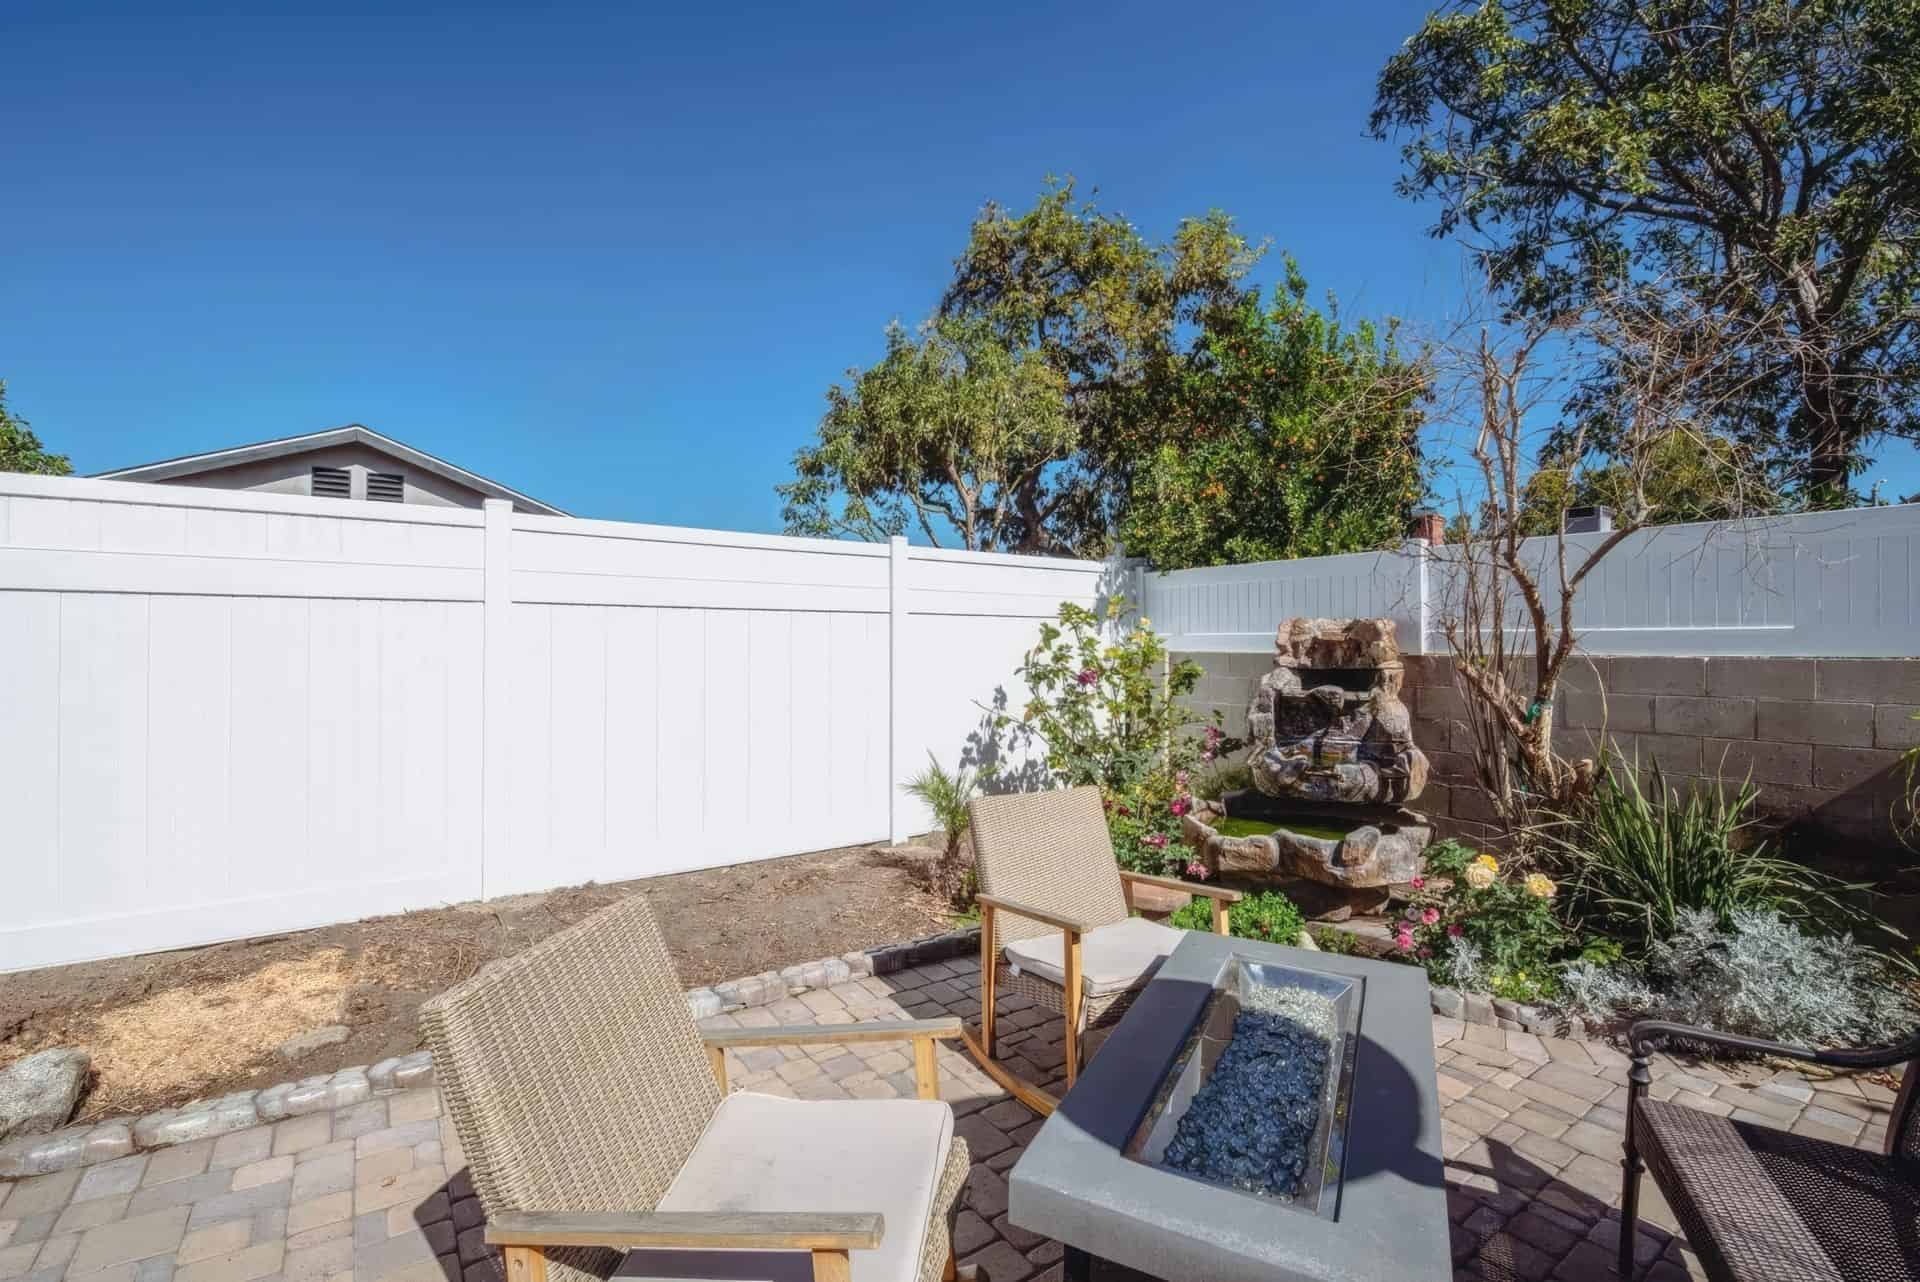 White vinyl privacy vertical fence creating boundary for backyard with decorative seating area and lush patches of grassy lawn